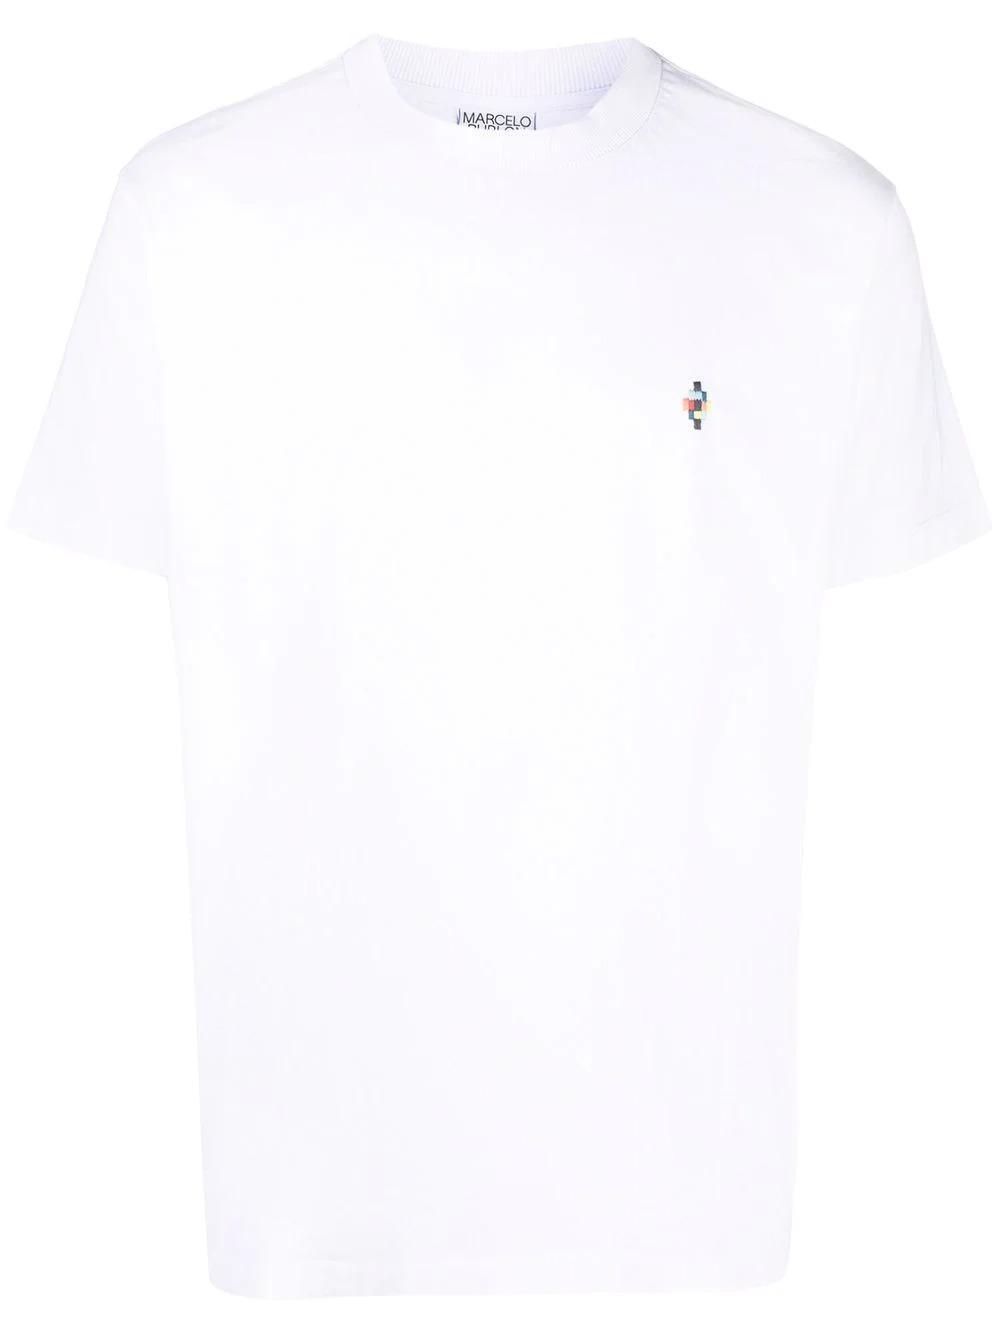 Marcelo Burlon Colourful Cross T-Shirt White | Hype Vault Kuala Lumpur | Asia's Top Trusted High-End Sneakers and Streetwear Store